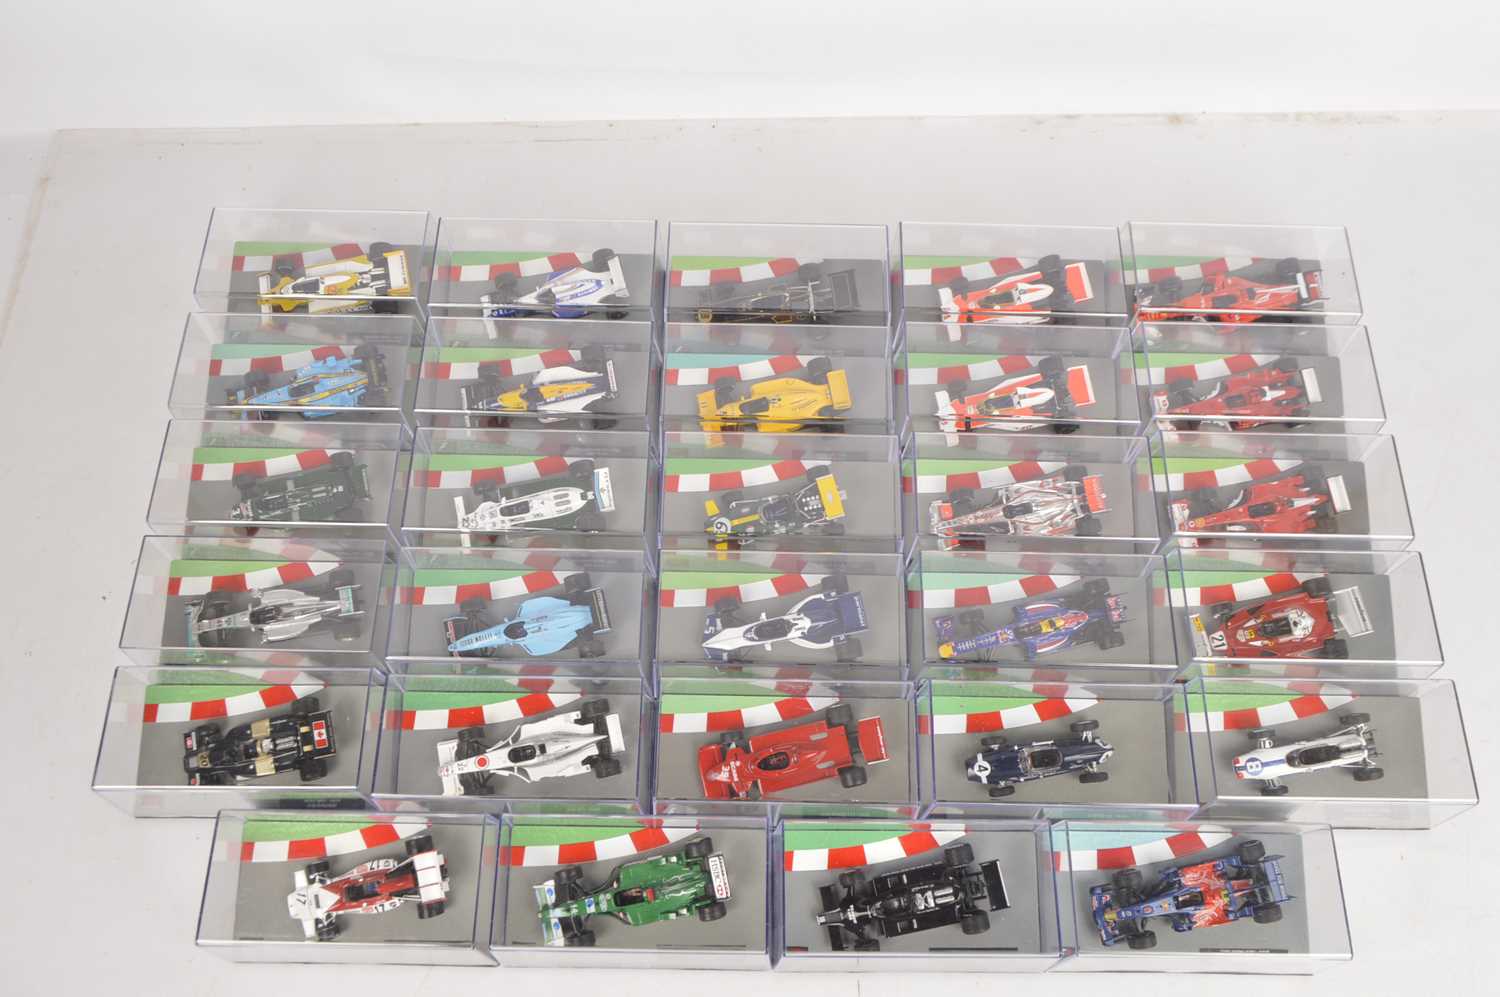 F1 Car Collection 1:43 Scale Issued by Panini (107), - Image 2 of 4